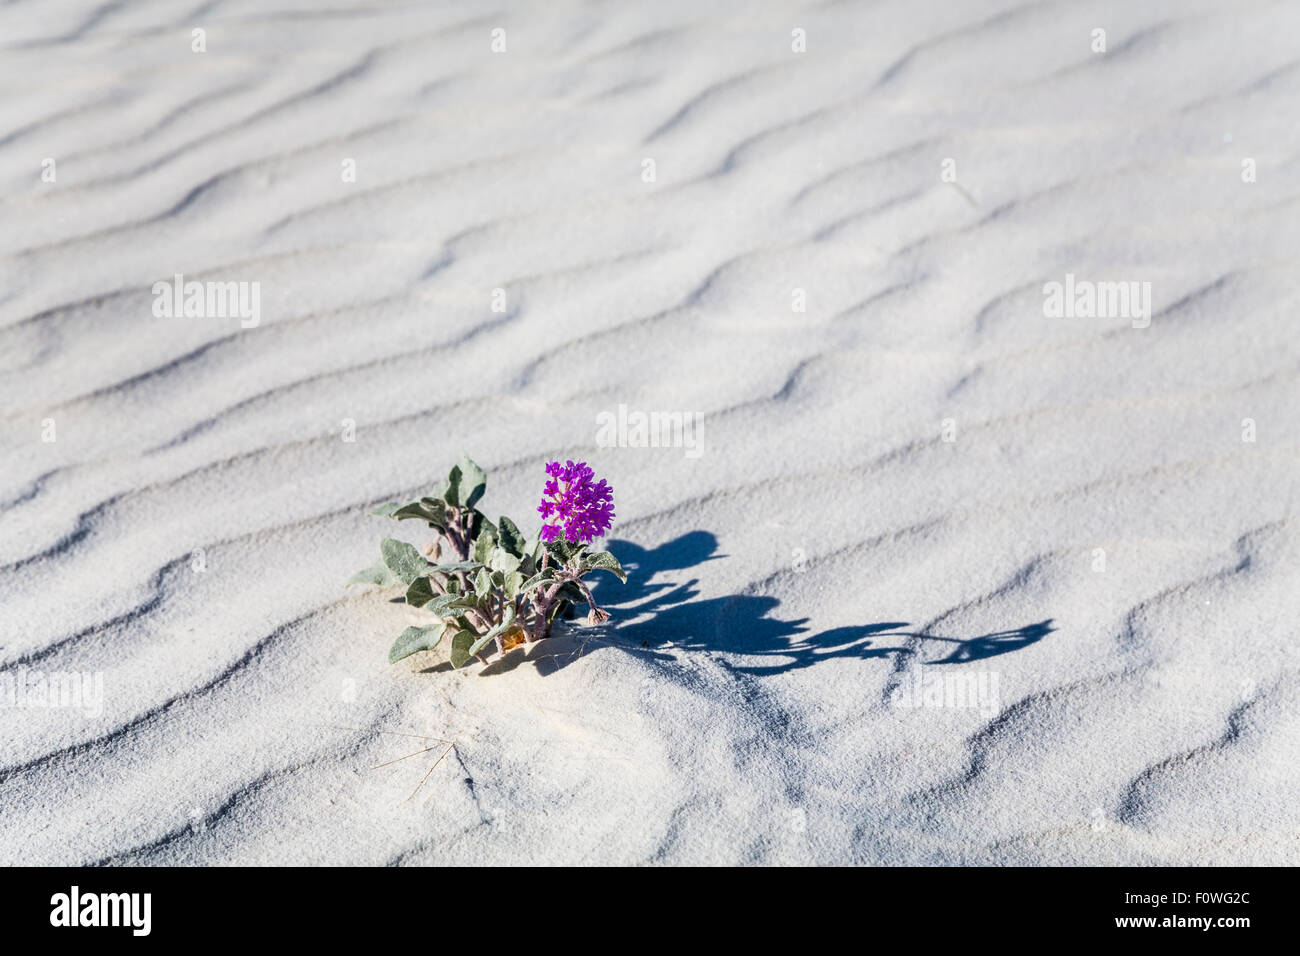 A purple sand verbena plant blooming in the gypsum dunes of the White sands National Monument near Alamogordo, New Mexico, USA. Stock Photo